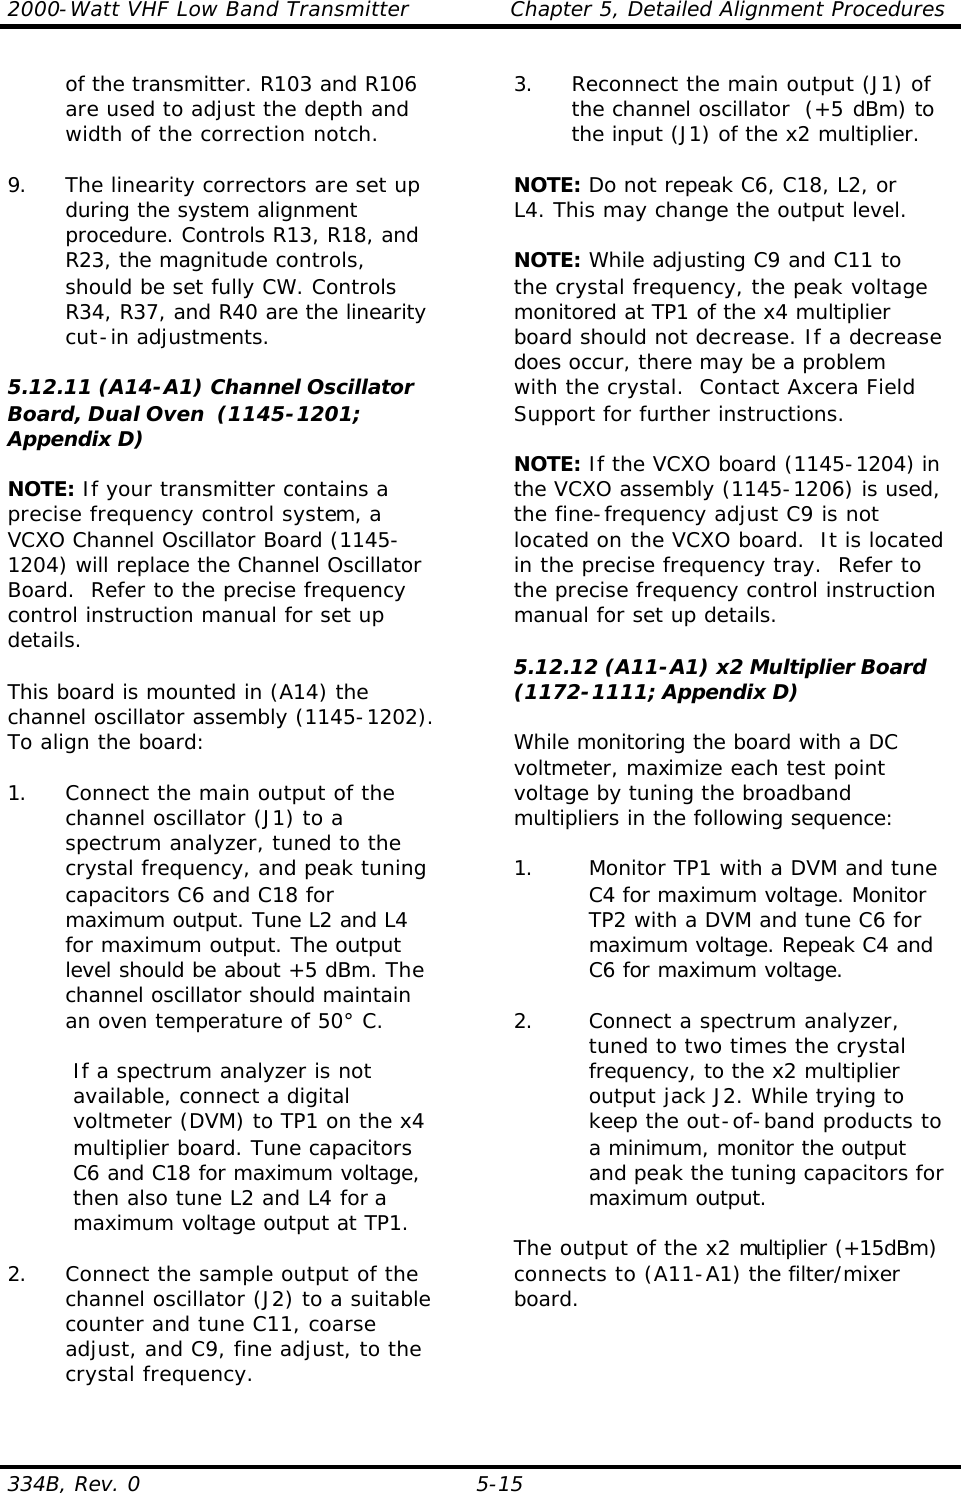 2000-Watt VHF Low Band Transmitter    Chapter 5, Detailed Alignment Procedures 334B, Rev. 0 5-15  of the transmitter. R103 and R106 are used to adjust the depth and width of the correction notch.  9. The linearity correctors are set up during the system alignment procedure. Controls R13, R18, and R23, the magnitude controls, should be set fully CW. Controls R34, R37, and R40 are the linearity cut-in adjustments.    5.12.11 (A14-A1) Channel Oscillator Board, Dual Oven  (1145-1201; Appendix D)  NOTE: If your transmitter contains a precise frequency control system, a VCXO Channel Oscillator Board (1145-1204) will replace the Channel Oscillator Board.  Refer to the precise frequency control instruction manual for set up details.  This board is mounted in (A14) the channel oscillator assembly (1145-1202). To align the board:  1. Connect the main output of the channel oscillator (J1) to a spectrum analyzer, tuned to the crystal frequency, and peak tuning capacitors C6 and C18 for maximum output. Tune L2 and L4 for maximum output. The output level should be about +5 dBm. The channel oscillator should maintain an oven temperature of 50° C.  If a spectrum analyzer is not available, connect a digital voltmeter (DVM) to TP1 on the x4 multiplier board. Tune capacitors C6 and C18 for maximum voltage, then also tune L2 and L4 for a maximum voltage output at TP1.  2. Connect the sample output of the channel oscillator (J2) to a suitable counter and tune C11, coarse adjust, and C9, fine adjust, to the crystal frequency.  3. Reconnect the main output (J1) of the channel oscillator  (+5 dBm) to the input (J1) of the x2 multiplier.  NOTE: Do not repeak C6, C18, L2, or  L4. This may change the output level.  NOTE: While adjusting C9 and C11 to the crystal frequency, the peak voltage monitored at TP1 of the x4 multiplier board should not decrease. If a decrease does occur, there may be a problem with the crystal.  Contact Axcera Field Support for further instructions.  NOTE: If the VCXO board (1145-1204) in the VCXO assembly (1145-1206) is used, the fine-frequency adjust C9 is not located on the VCXO board.  It is located in the precise frequency tray.  Refer to the precise frequency control instruction manual for set up details.  5.12.12 (A11-A1) x2 Multiplier Board  (1172-1111; Appendix D)  While monitoring the board with a DC voltmeter, maximize each test point voltage by tuning the broadband multipliers in the following sequence:  1. Monitor TP1 with a DVM and tune C4 for maximum voltage. Monitor TP2 with a DVM and tune C6 for maximum voltage. Repeak C4 and C6 for maximum voltage.  2. Connect a spectrum analyzer, tuned to two times the crystal frequency, to the x2 multiplier output jack J2. While trying to keep the out-of-band products to a minimum, monitor the output and peak the tuning capacitors for maximum output.  The output of the x2 multiplier (+15dBm) connects to (A11-A1) the filter/mixer board. 